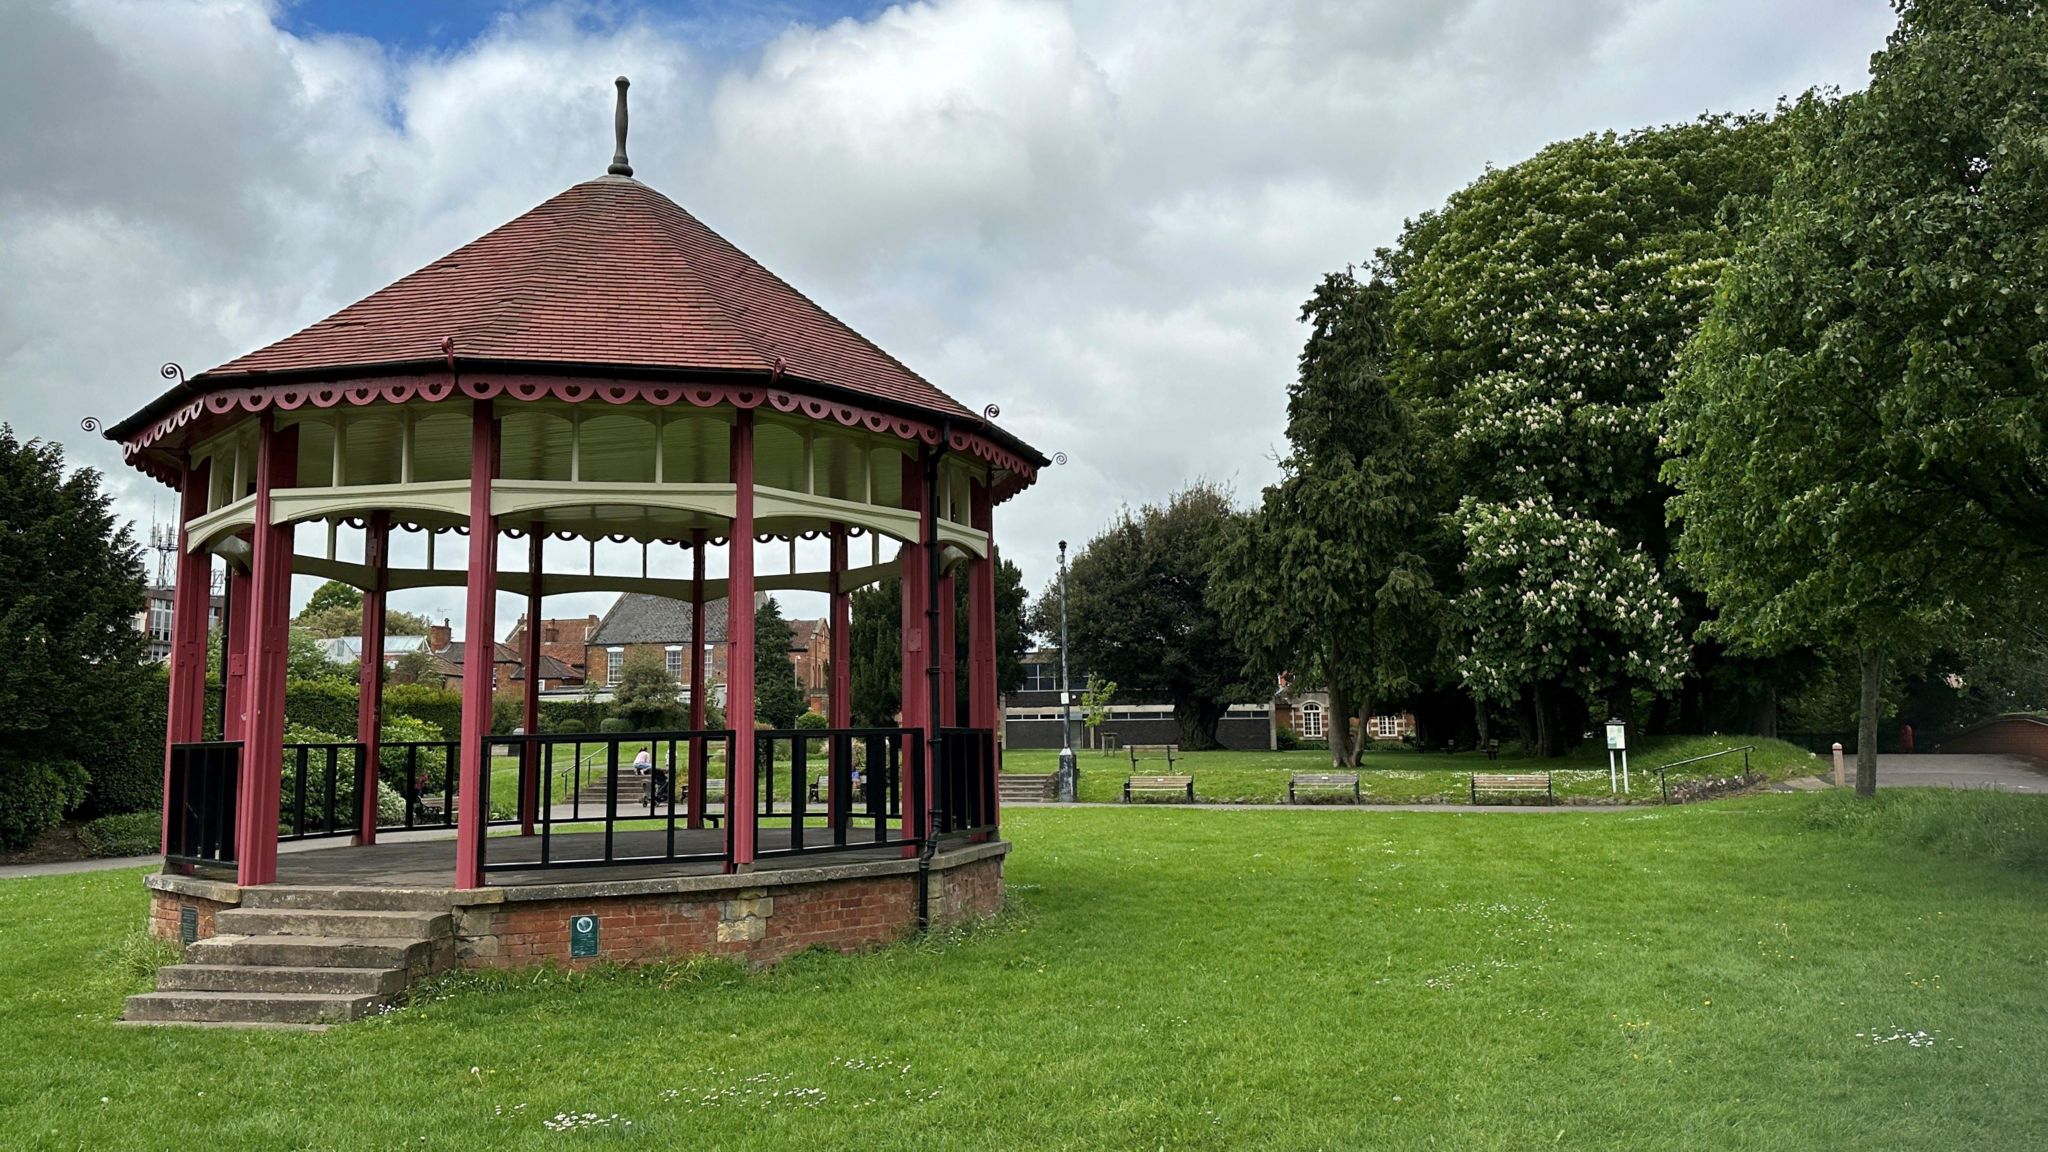 A bandstand in the middle of a green space surrounded by tall trees